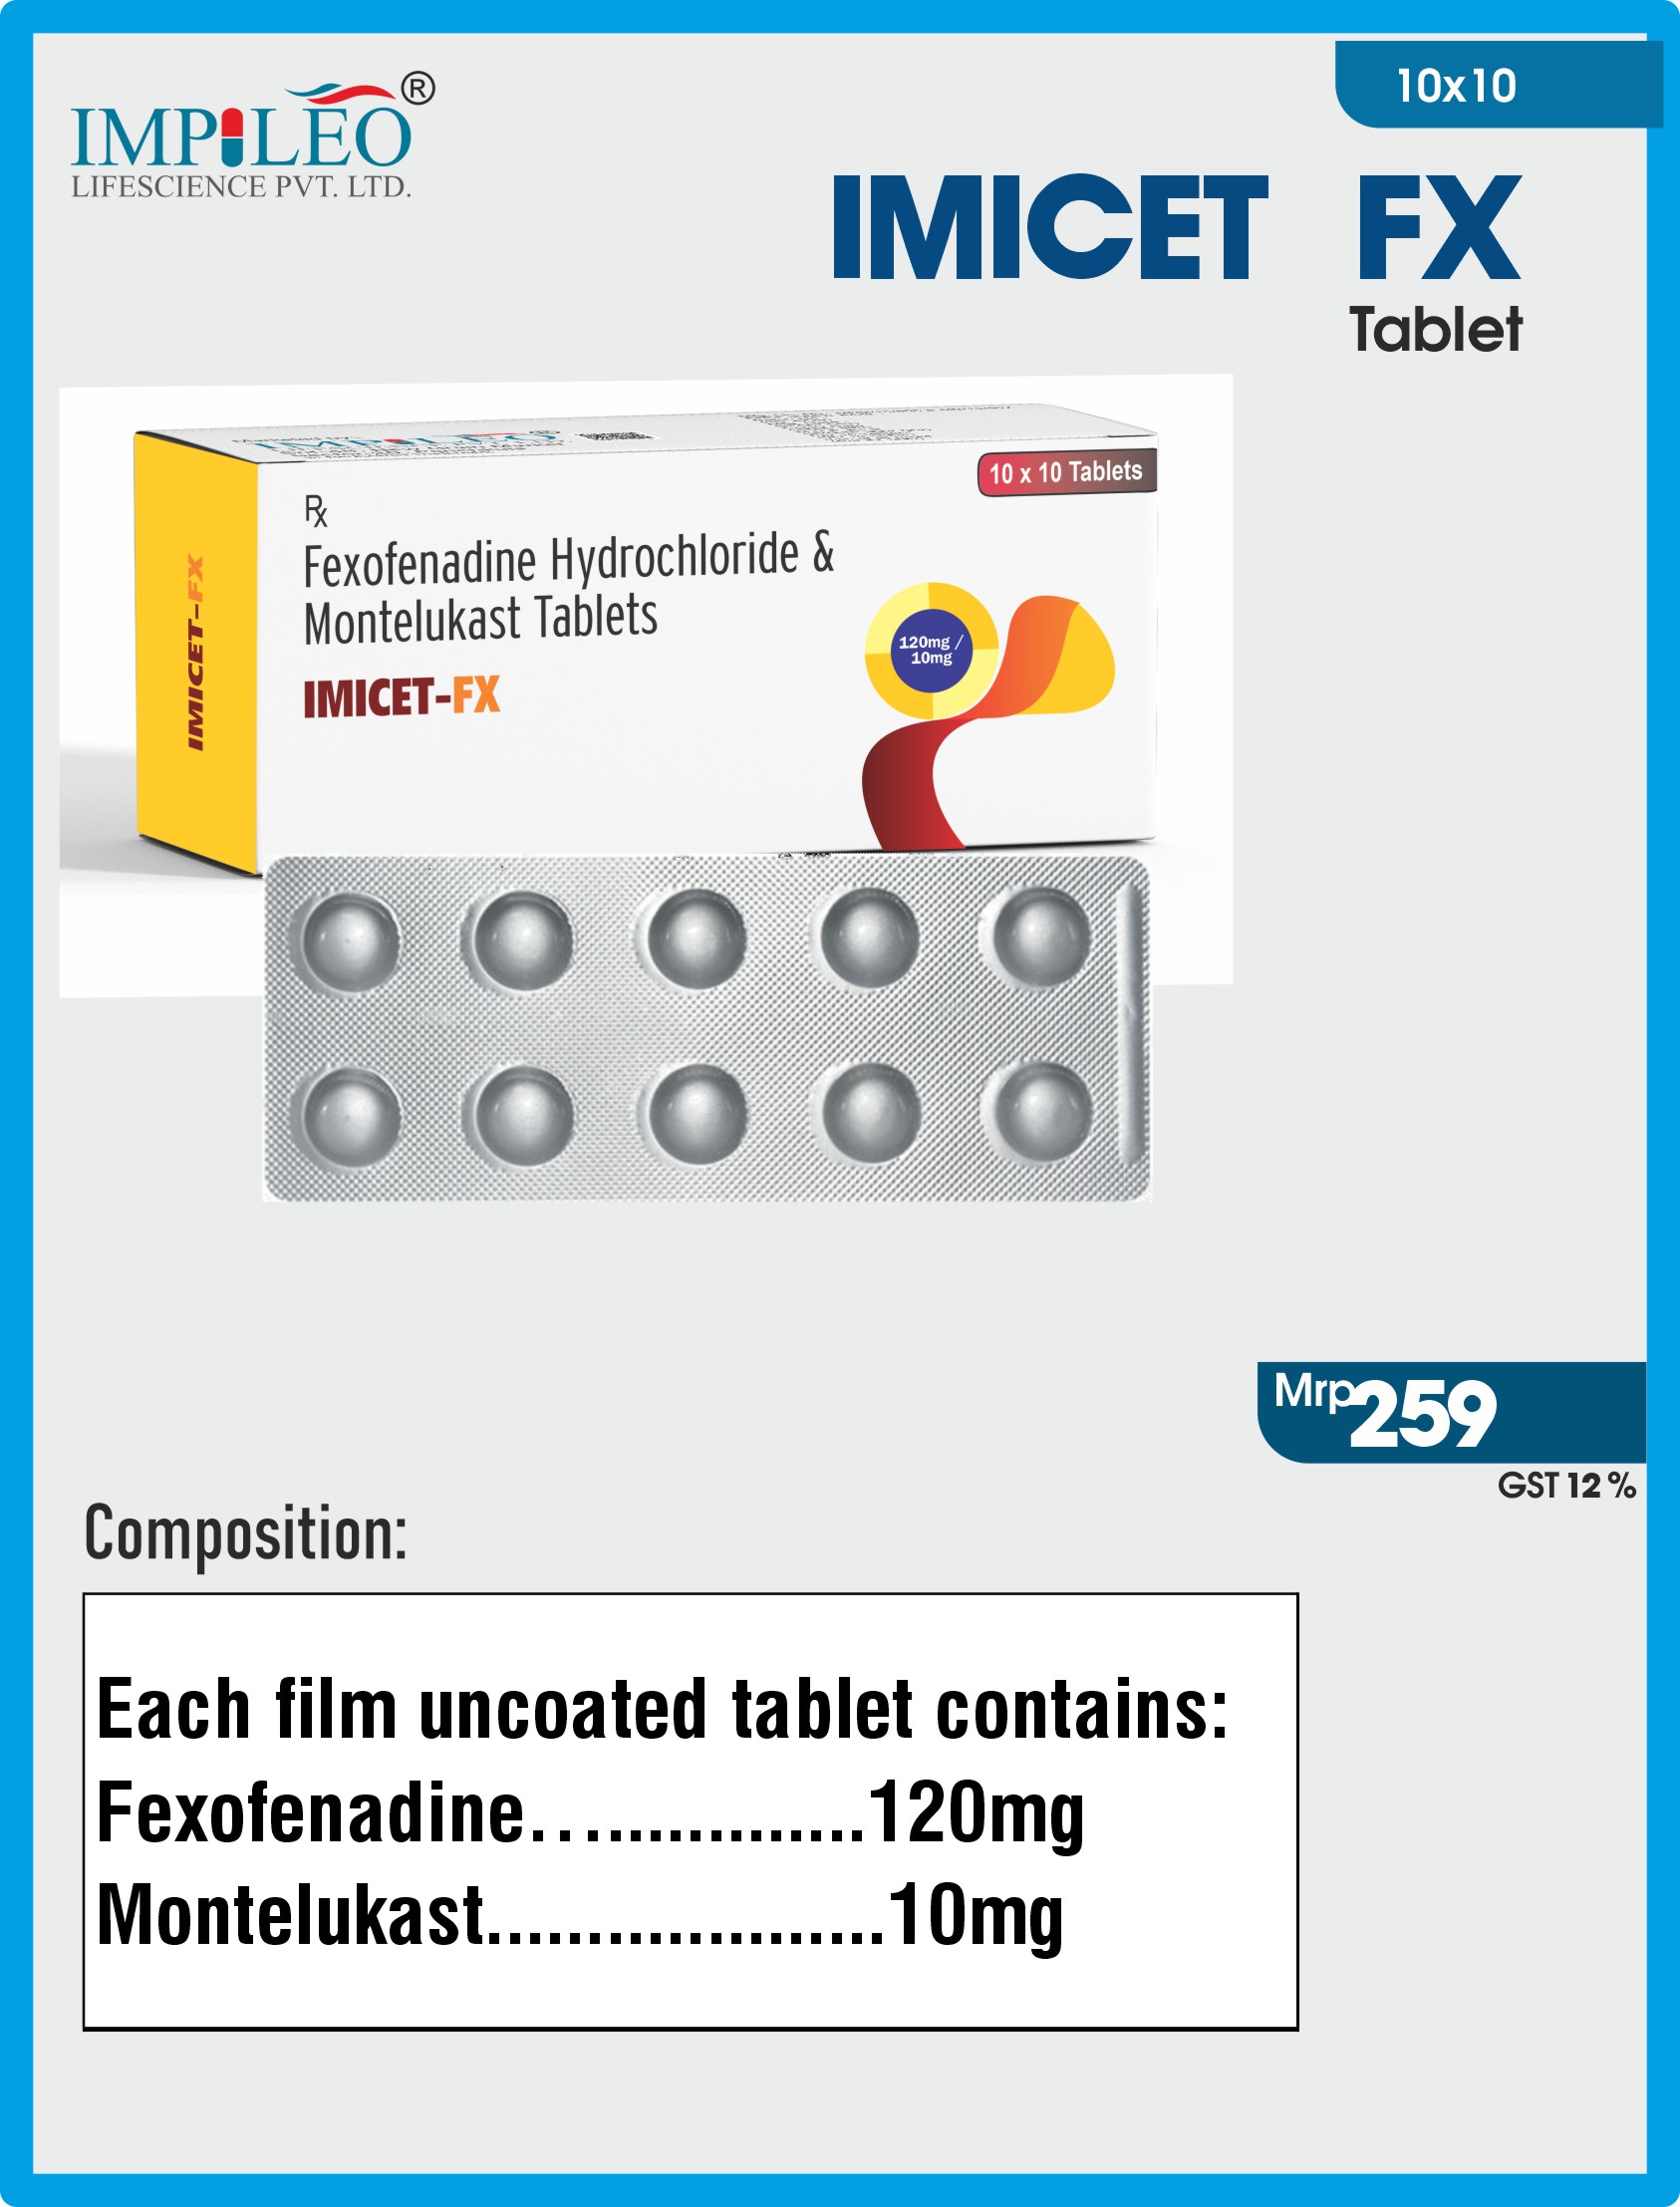 High-Quality IMICET FX Tablets from Top Third Party Manufacturing in Baddi